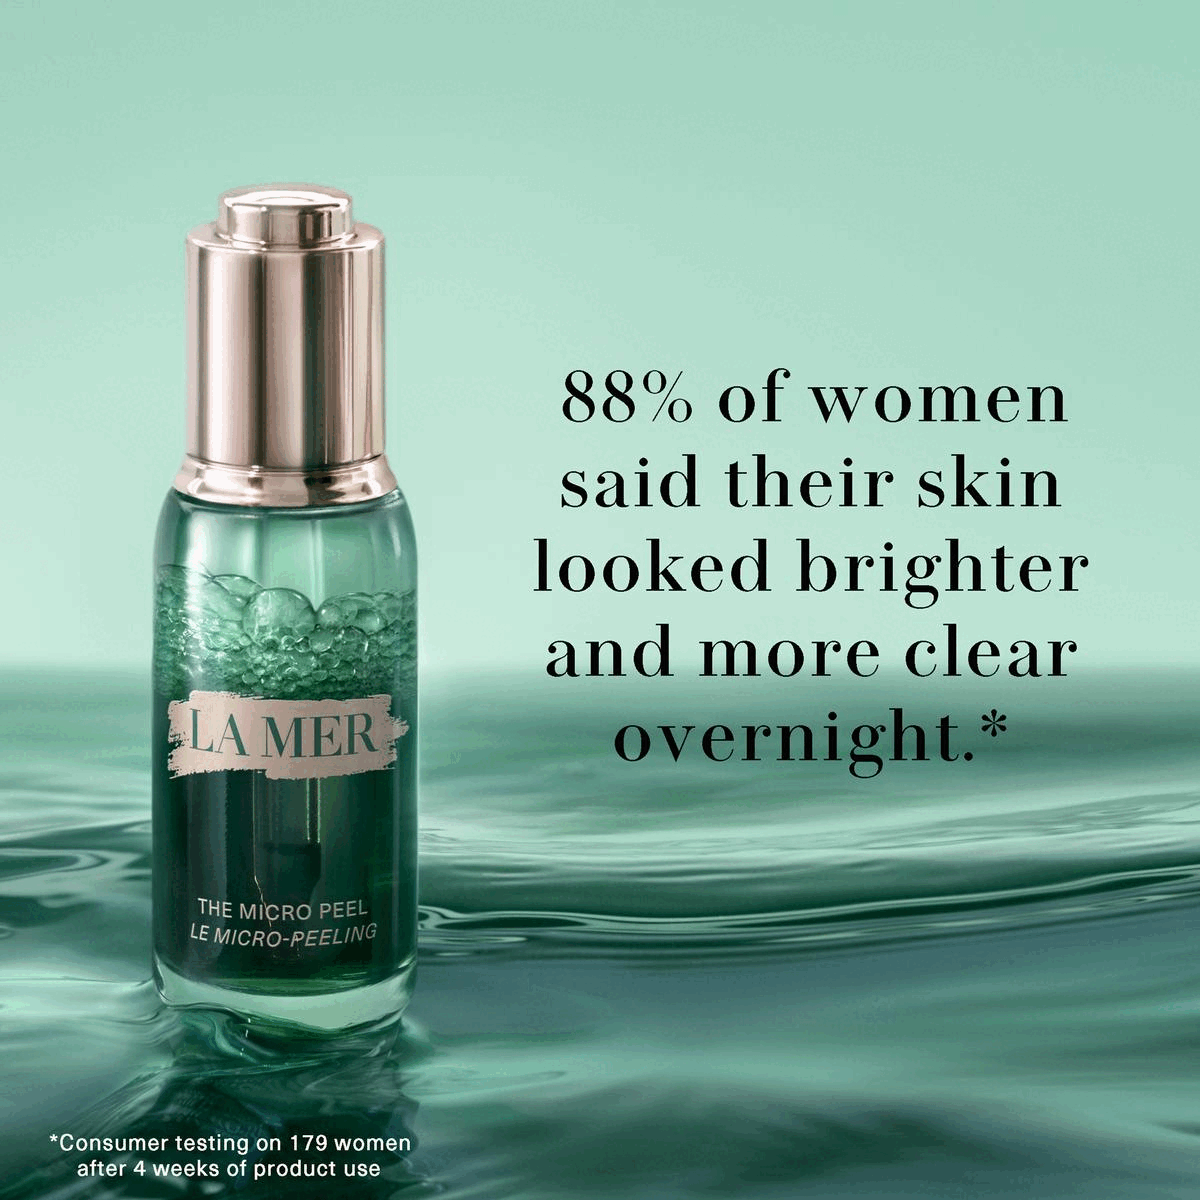 Image 1, 88% of women said their skin looked brighter and more clear overnight* *consumer testing on 179 women after 4 weeks of product use. Image 2, 94% of women said their skin felt replenished overnight* *consumer testing on 179 women after 4 weeks of product use. Image 3, 93% of women reported their skin felt smoother in just one use* *consumer testing on 179 women after 4 weeks of product use